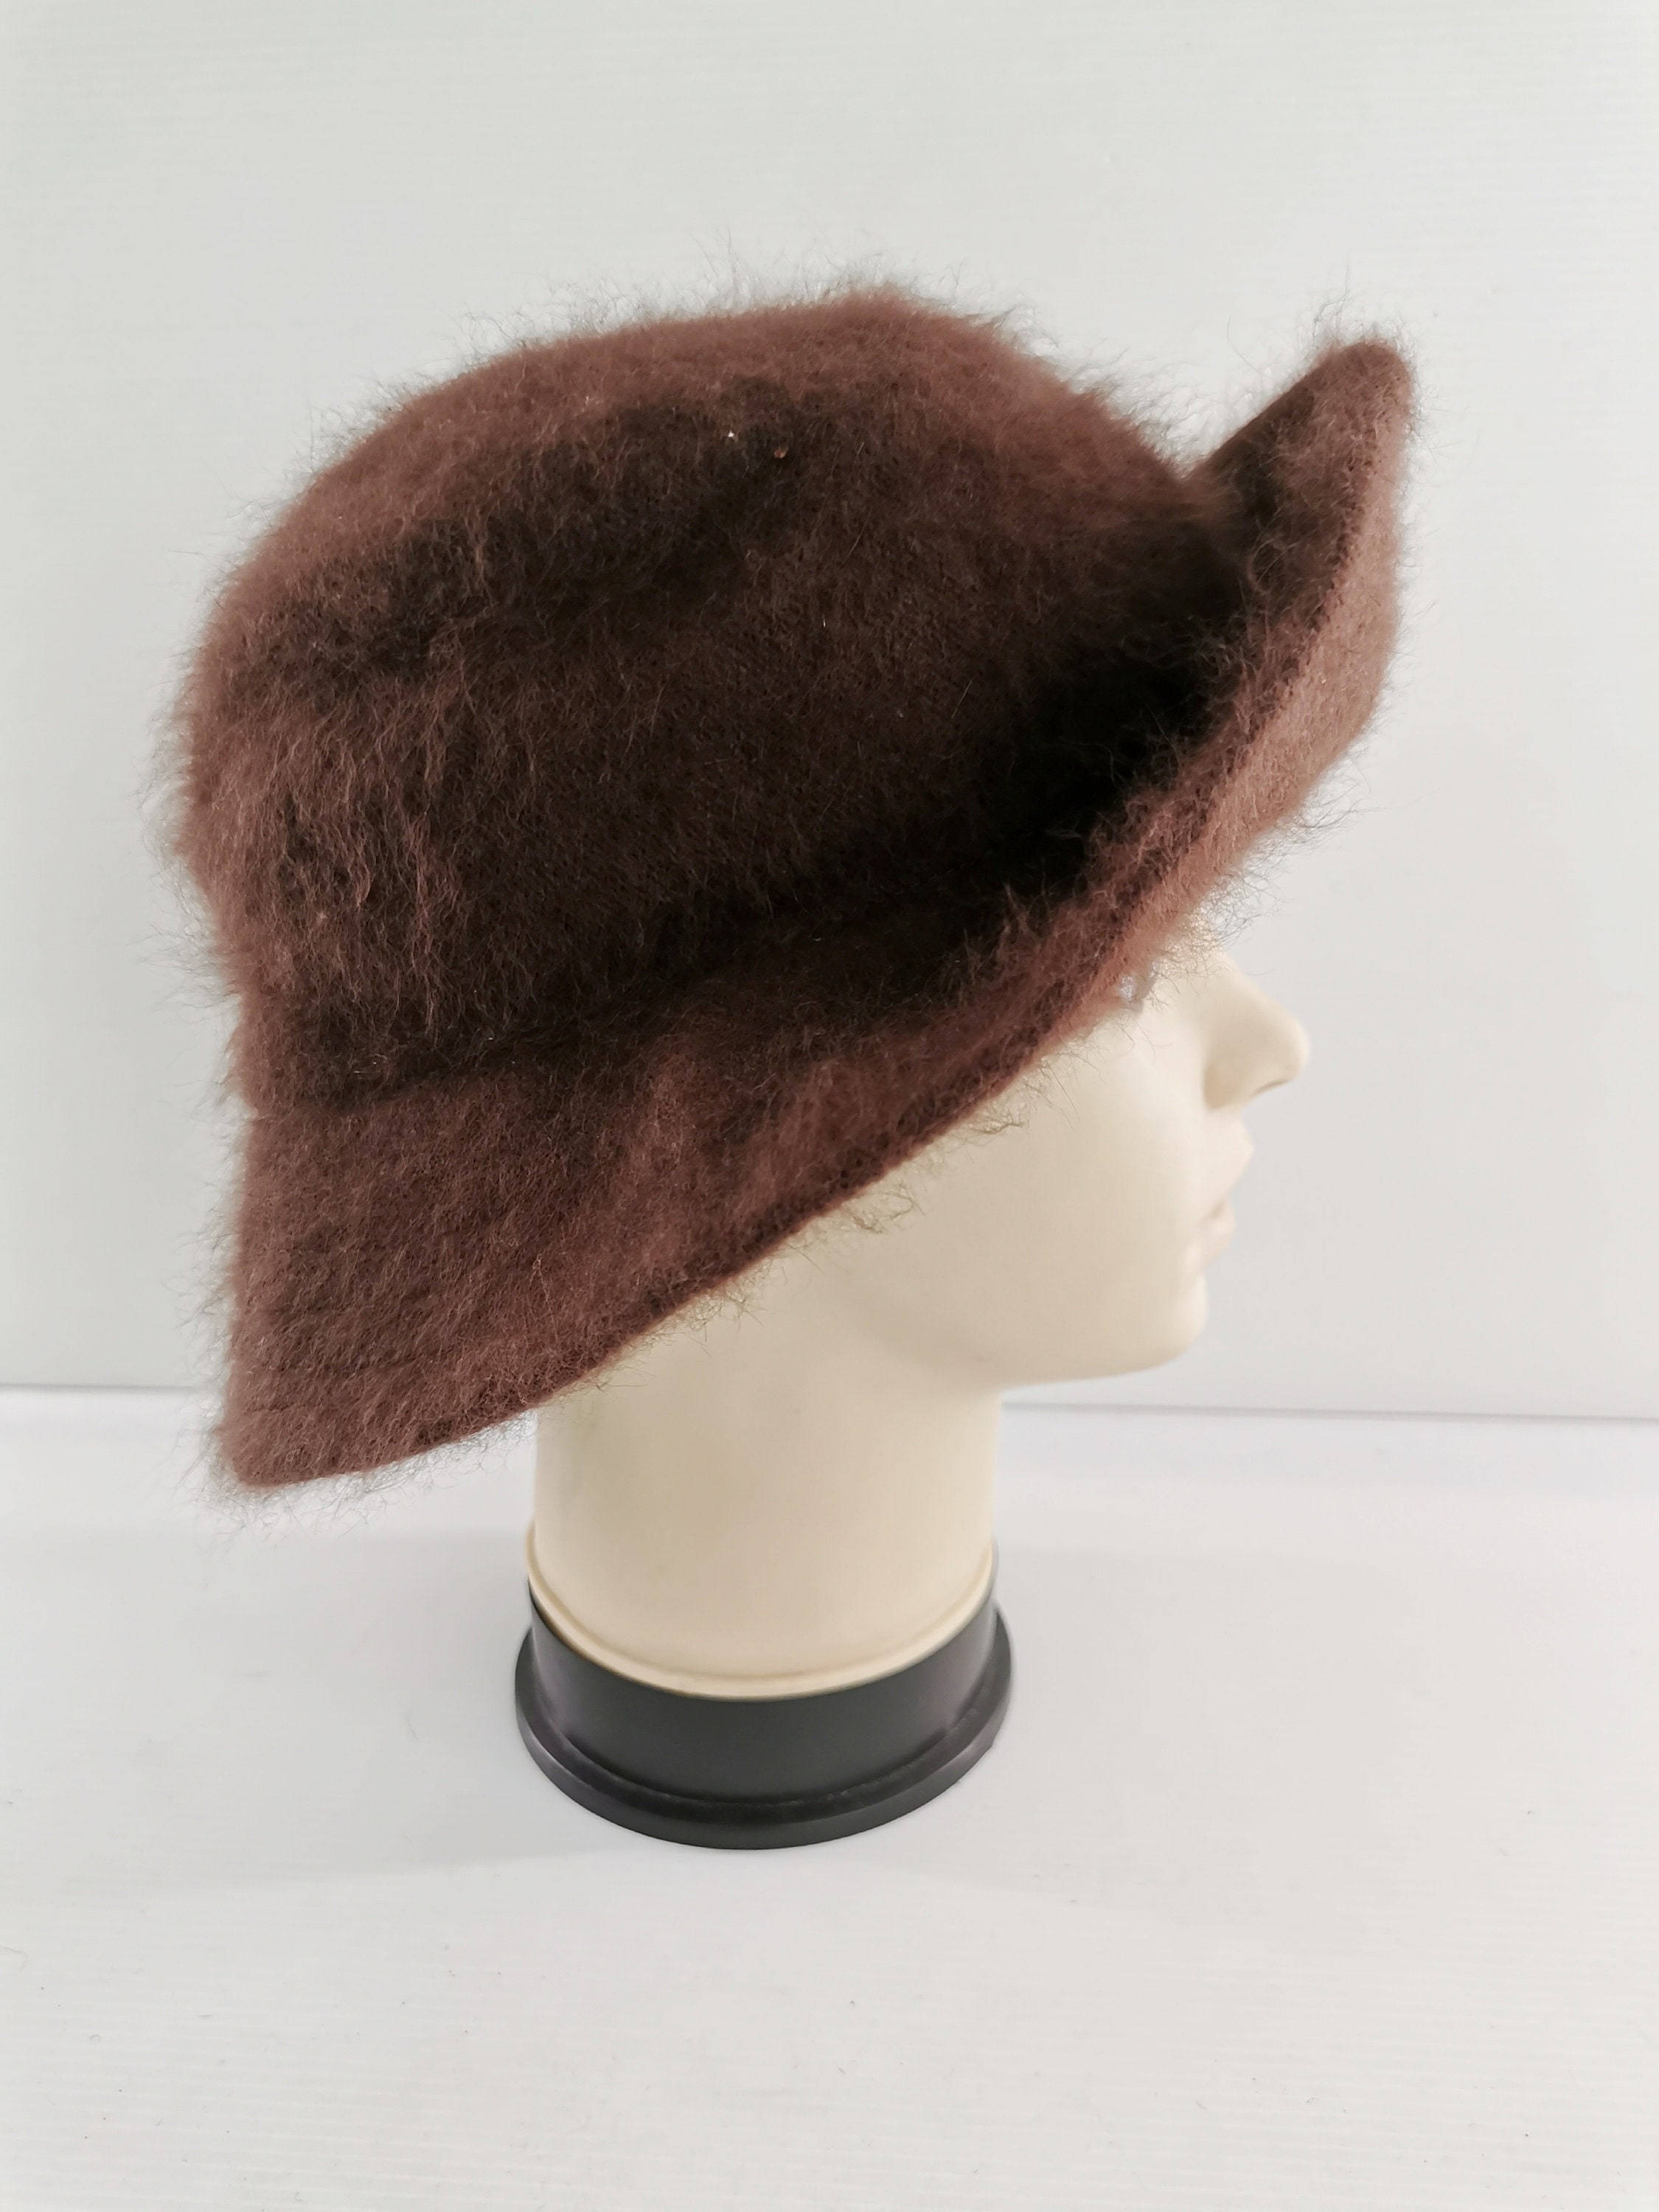 Maxime Labeyrie Hat Vintage Maxime Labeyrie Wool Bucket Hat Cap -   Norway